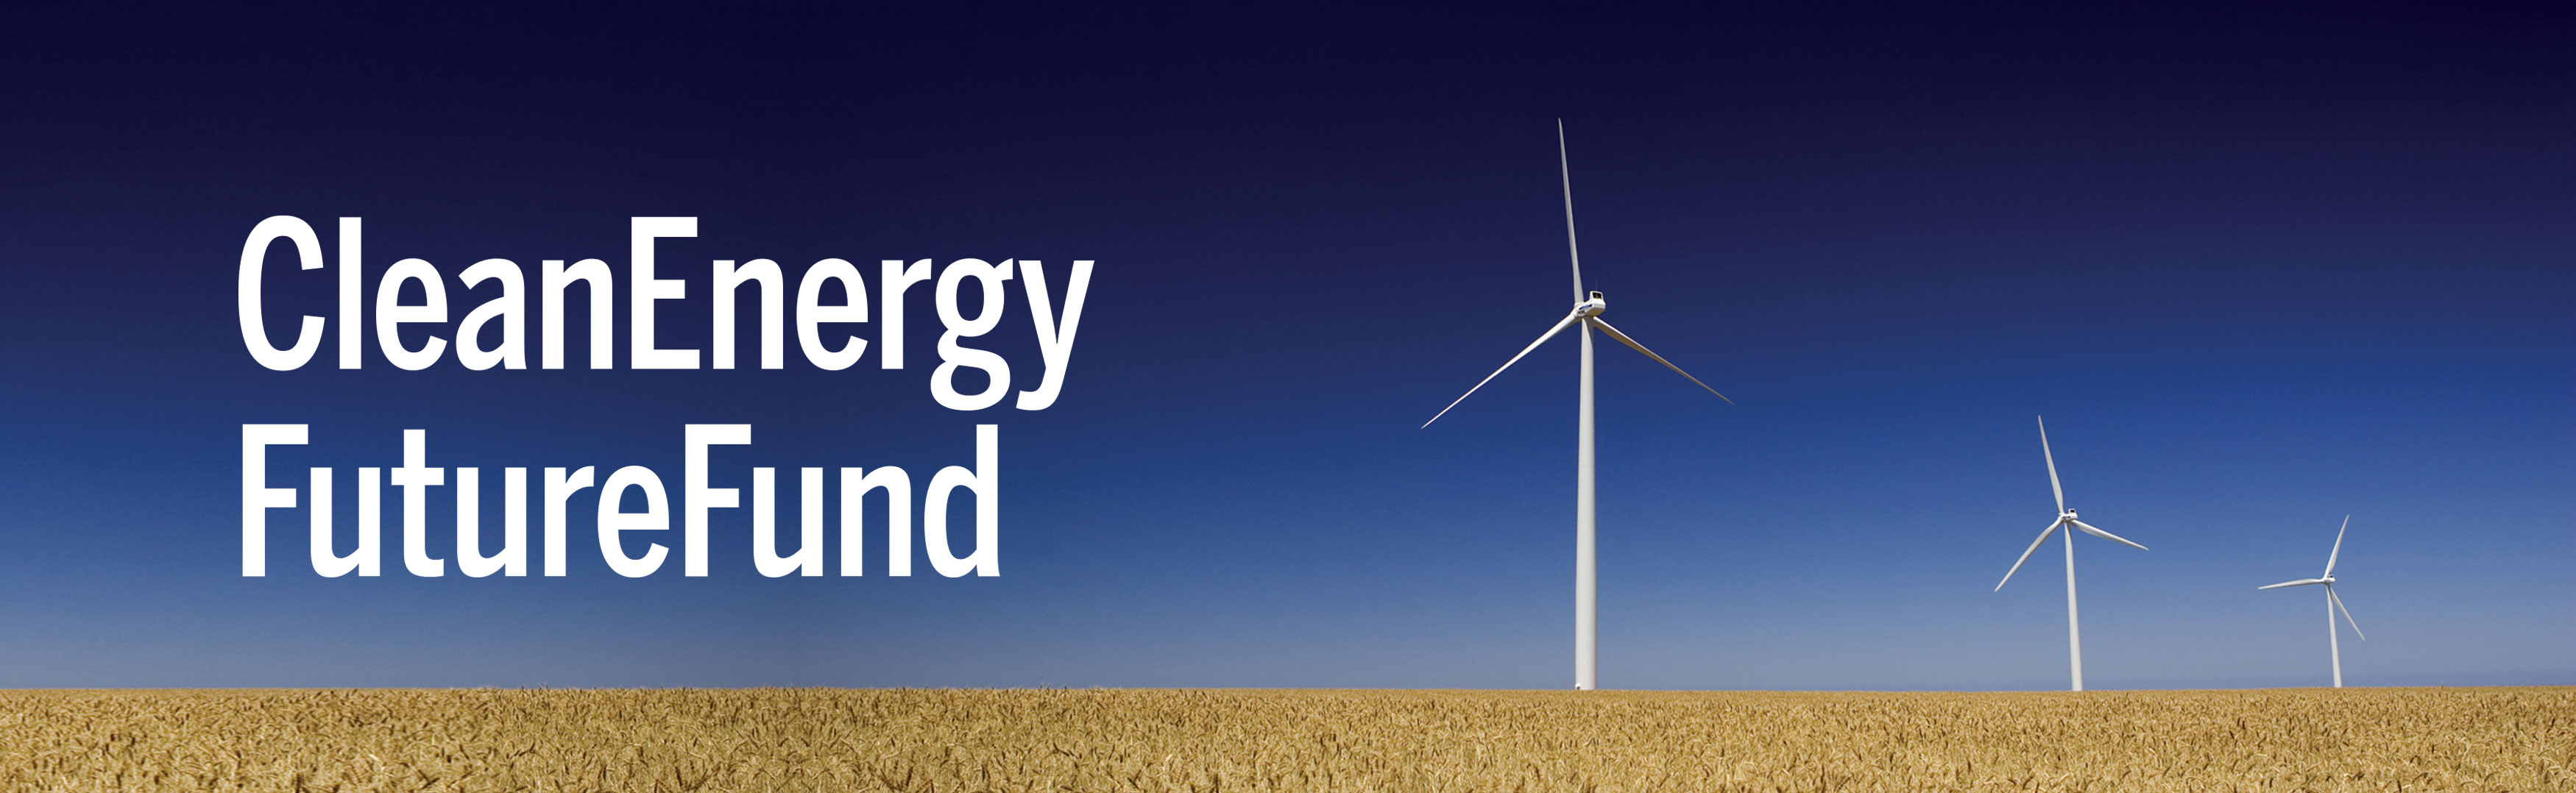 Clean Energy Future Fund banner